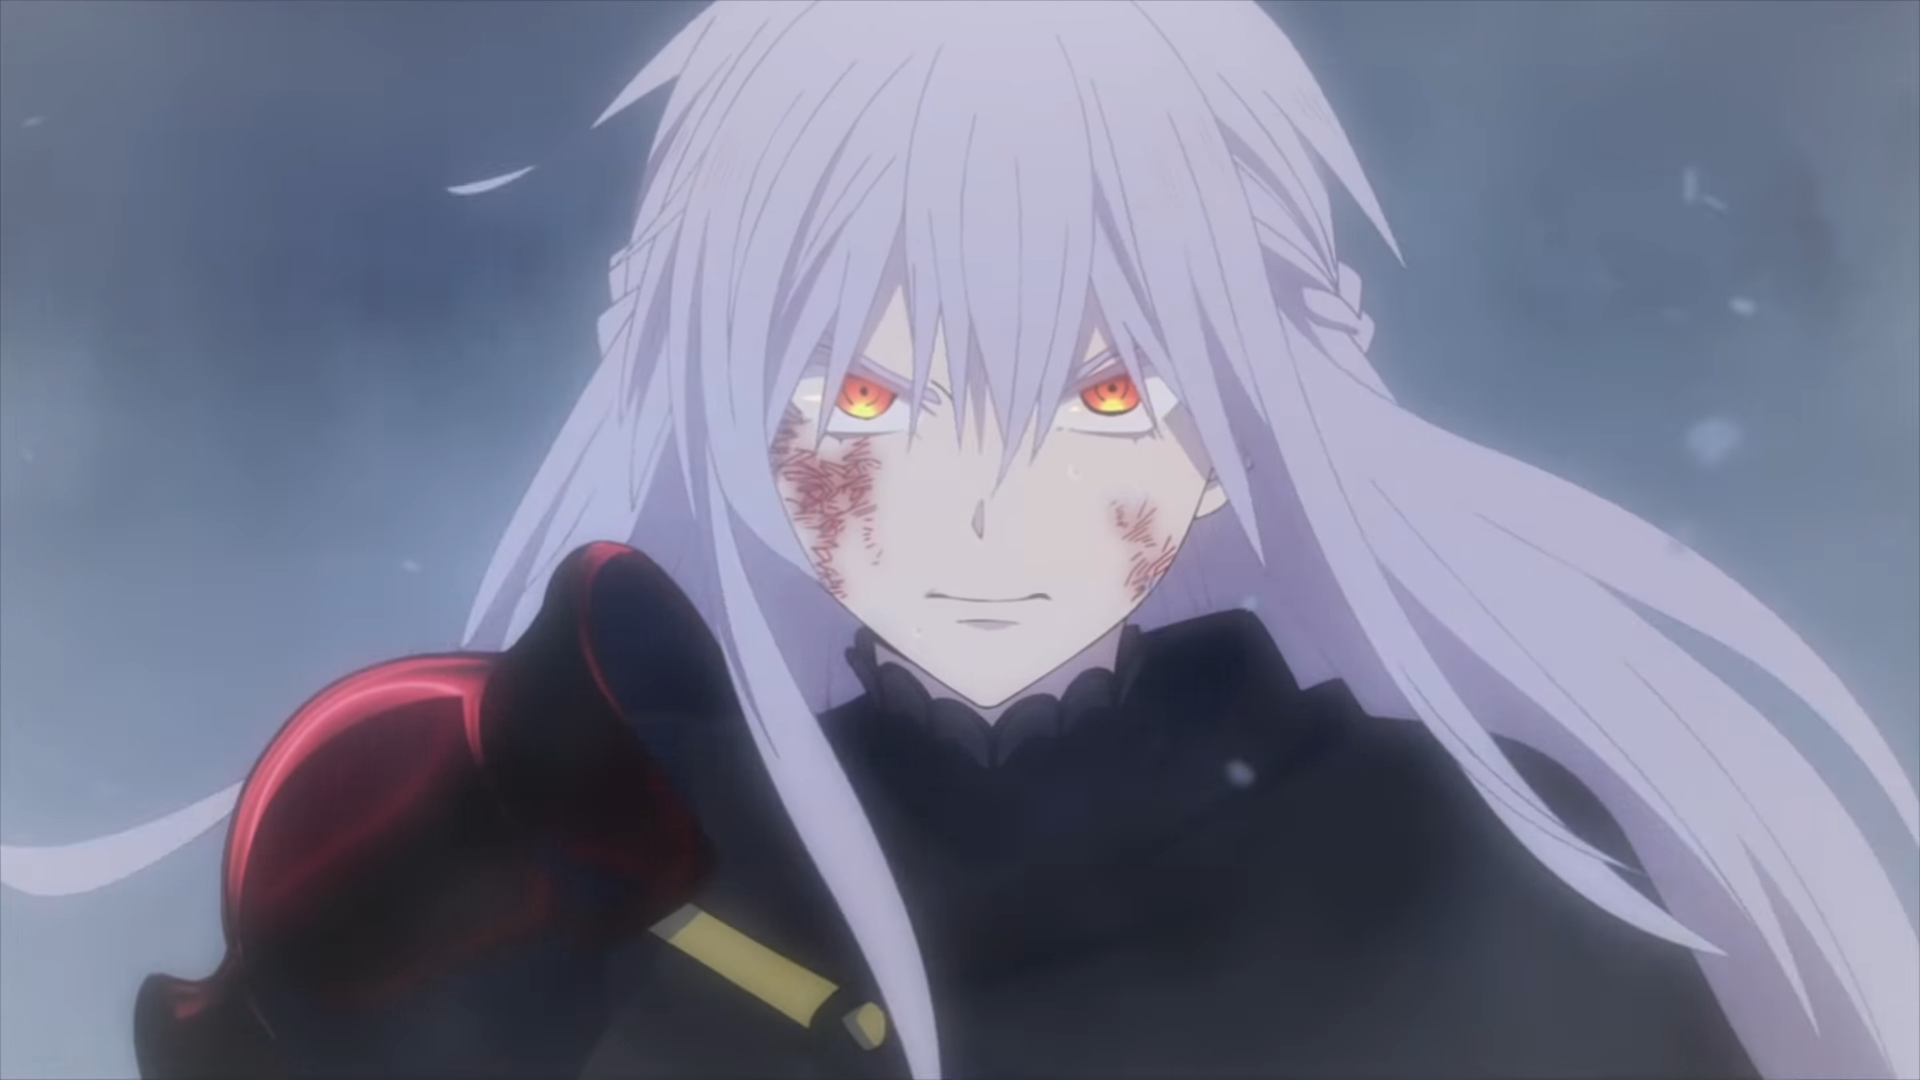 The Case Study of Vanitas' 15th Anime Episode Previewed